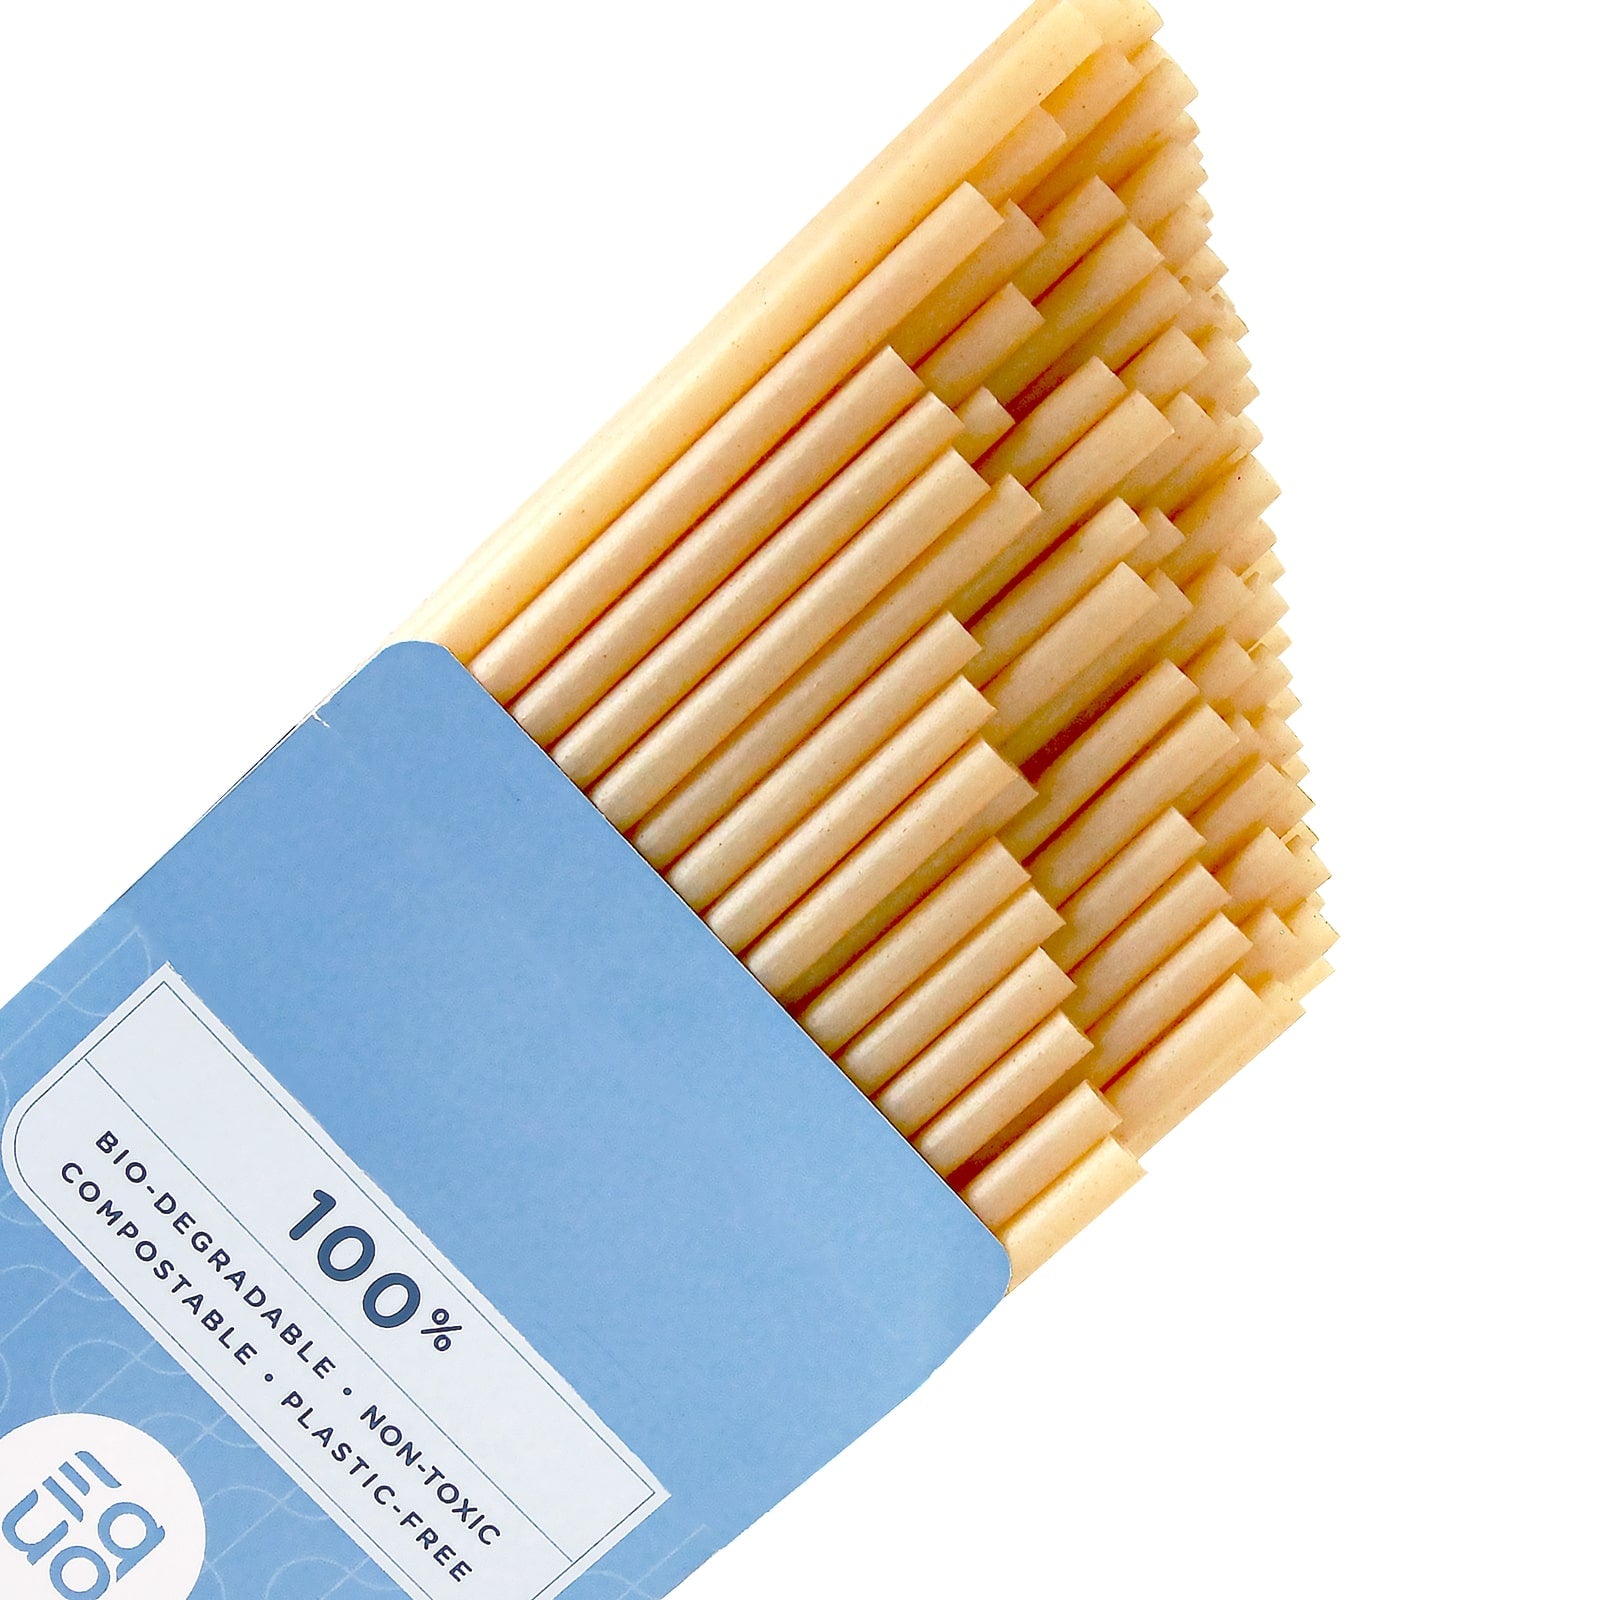 Equo Sugarcane Straws | Buy at The Green Collective